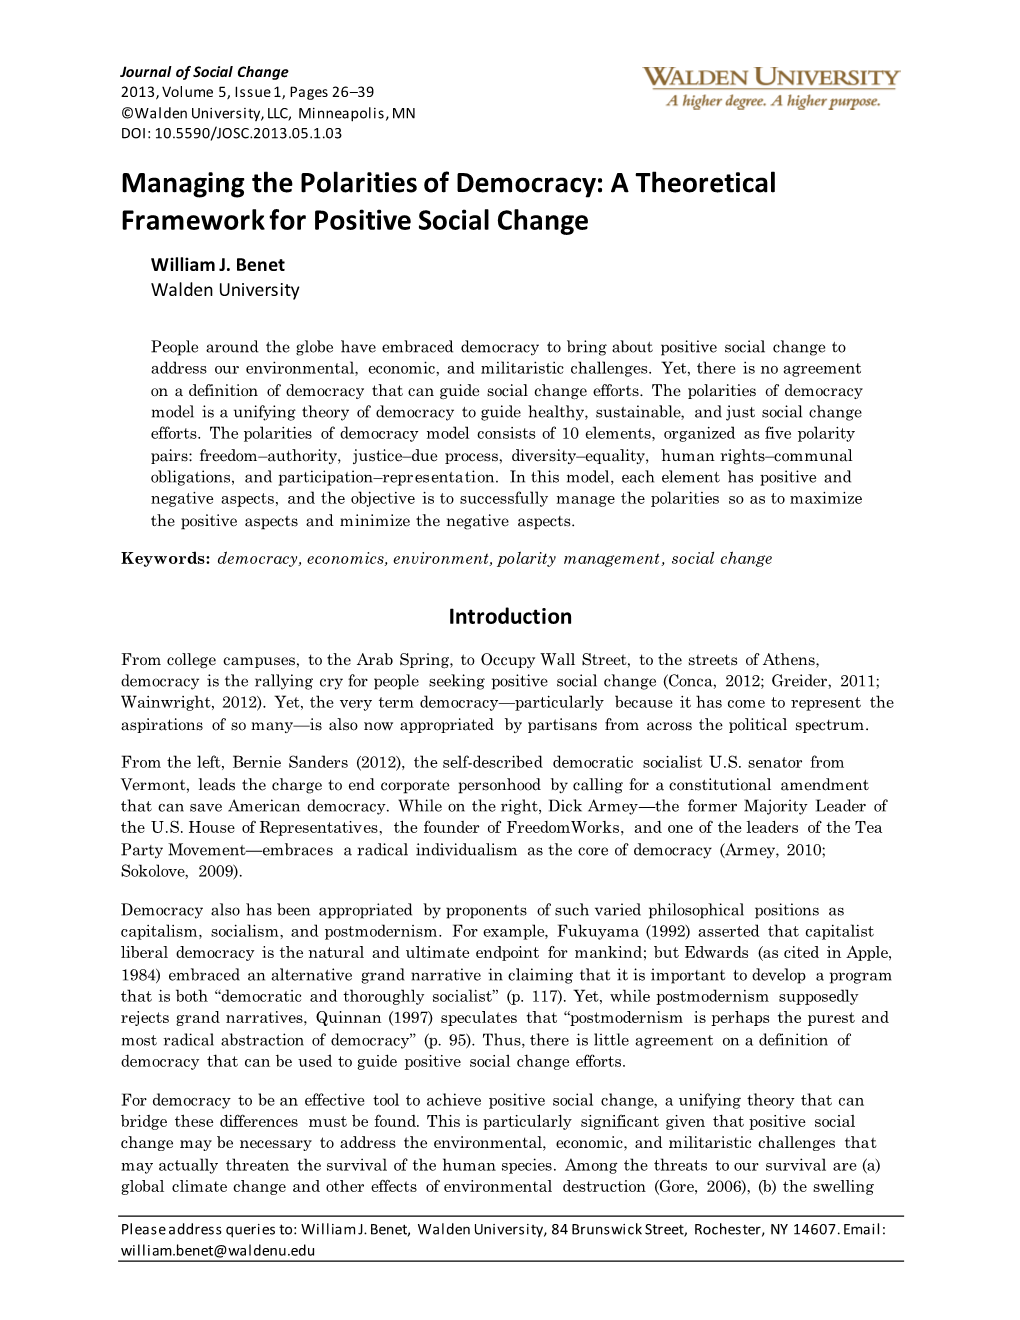 Managing the Polarities of Democracy: a Theoretical Framework for Positive Social Change William J